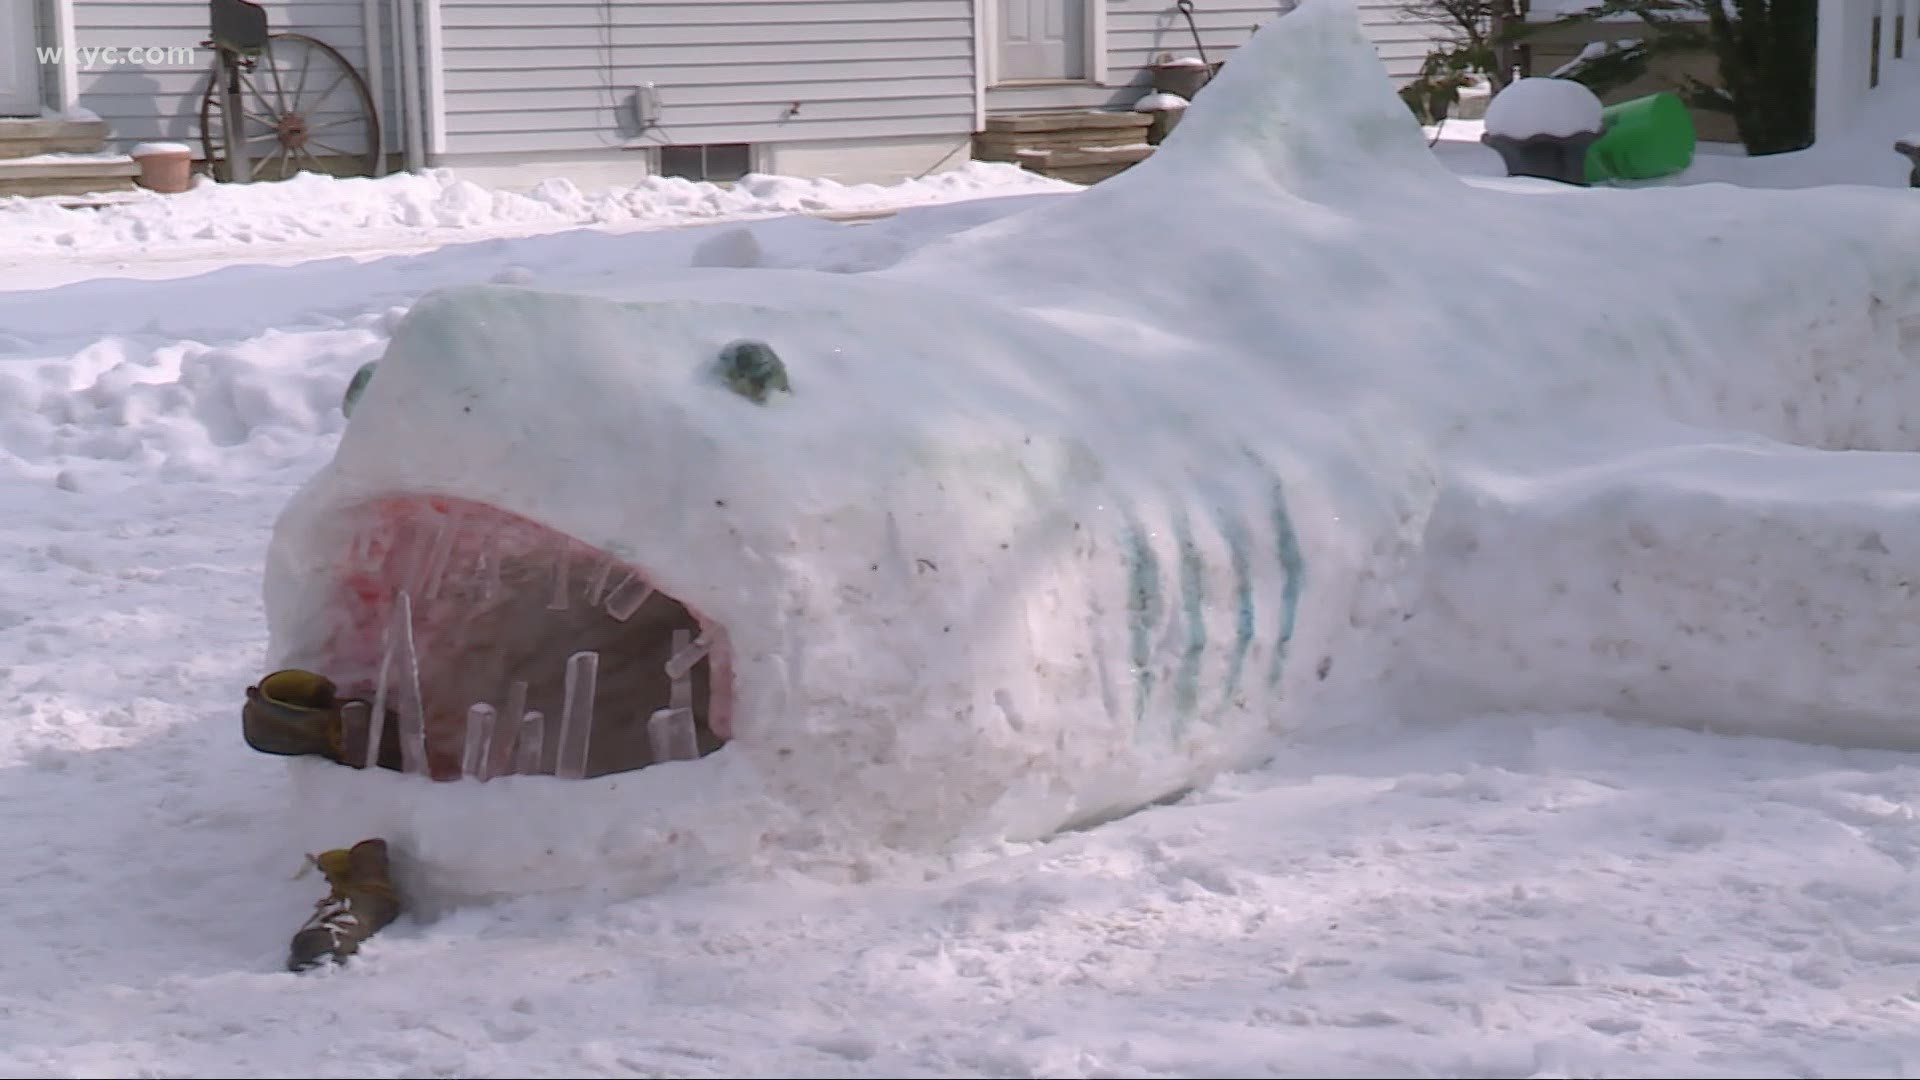 The "Jaws" lookalike was spotted guarding East Bridge Street in Berea. 3News spoke with one of the kids who helped create him!